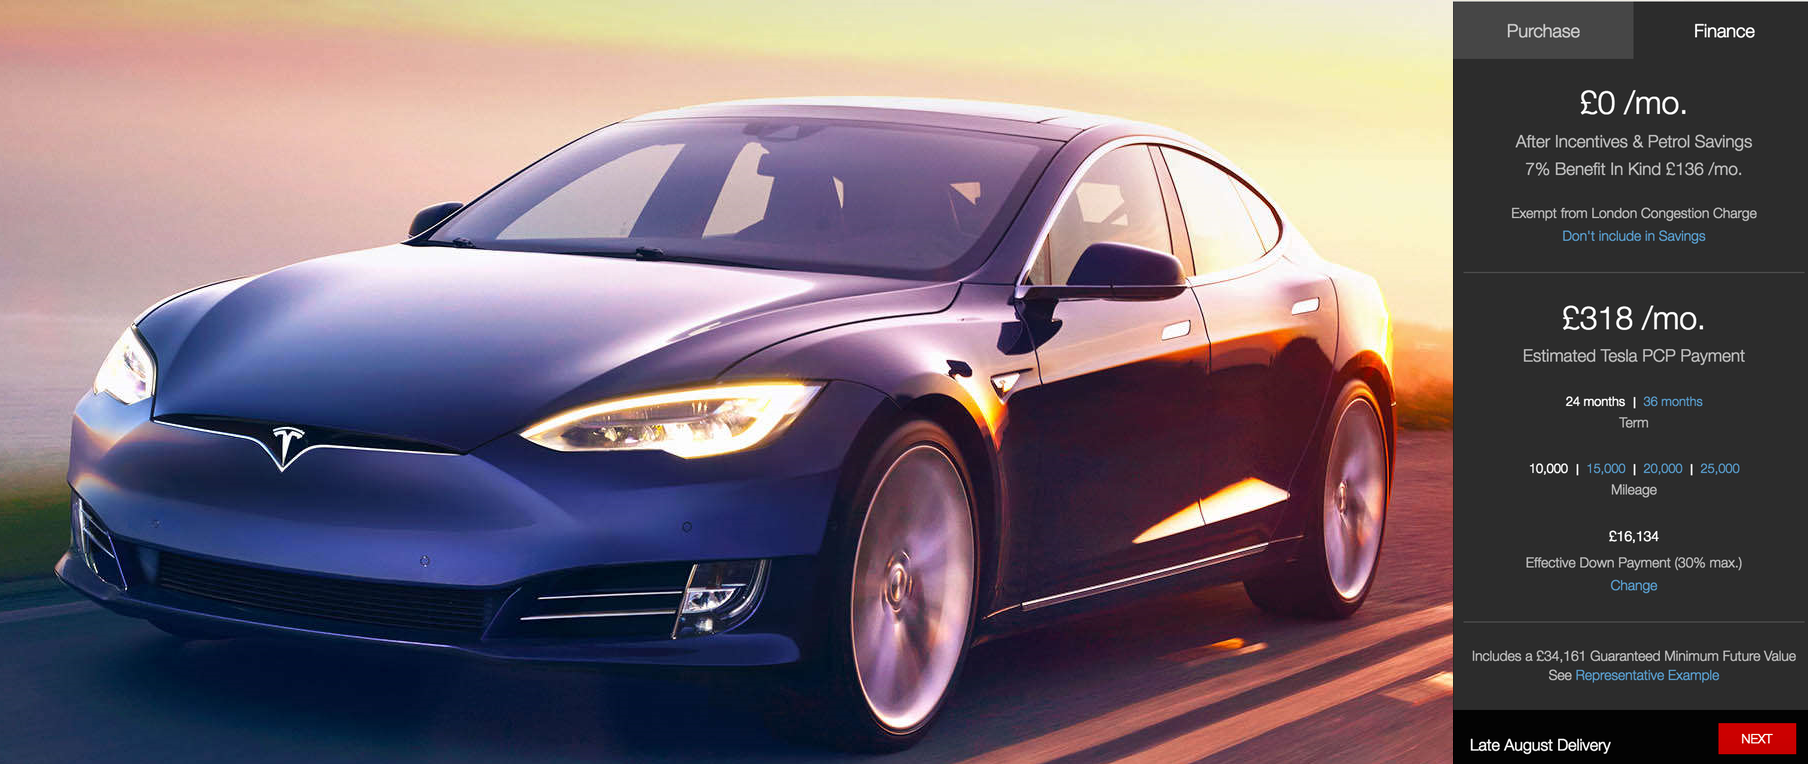 Tesla says you can get new Model S monthly cost down to £0 in London